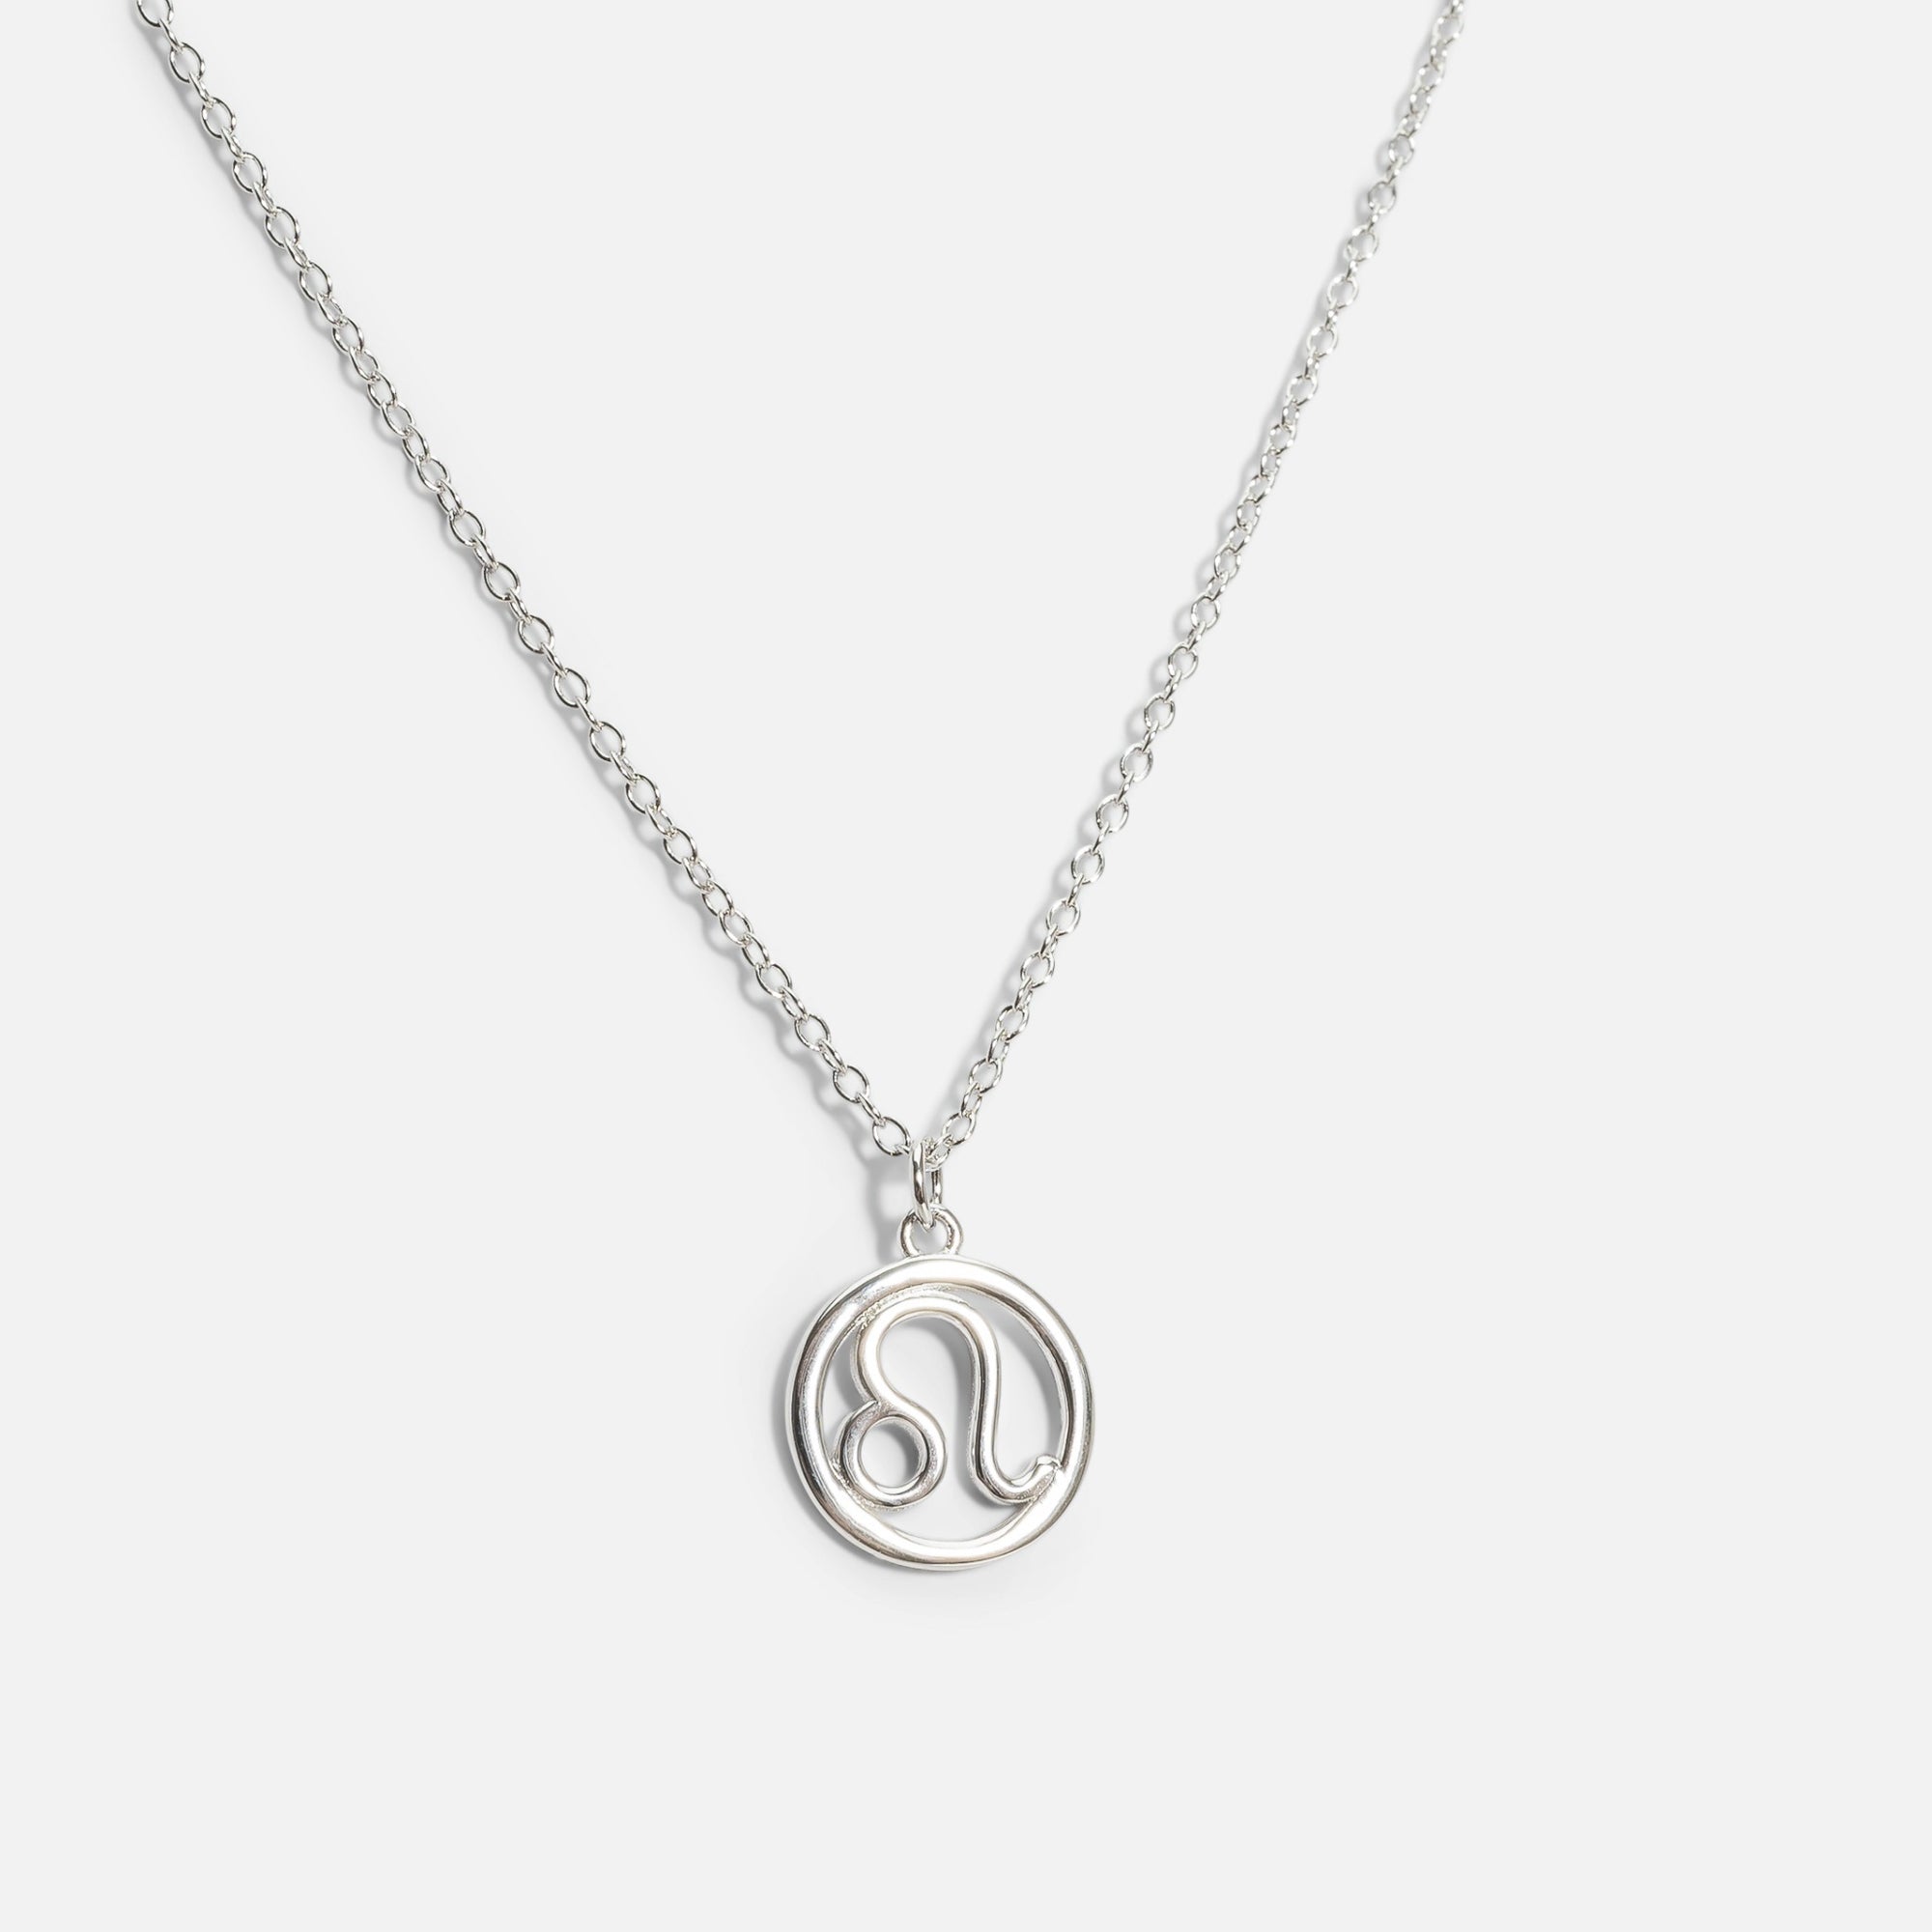 Sterling silver pendant with leo zodiac sign